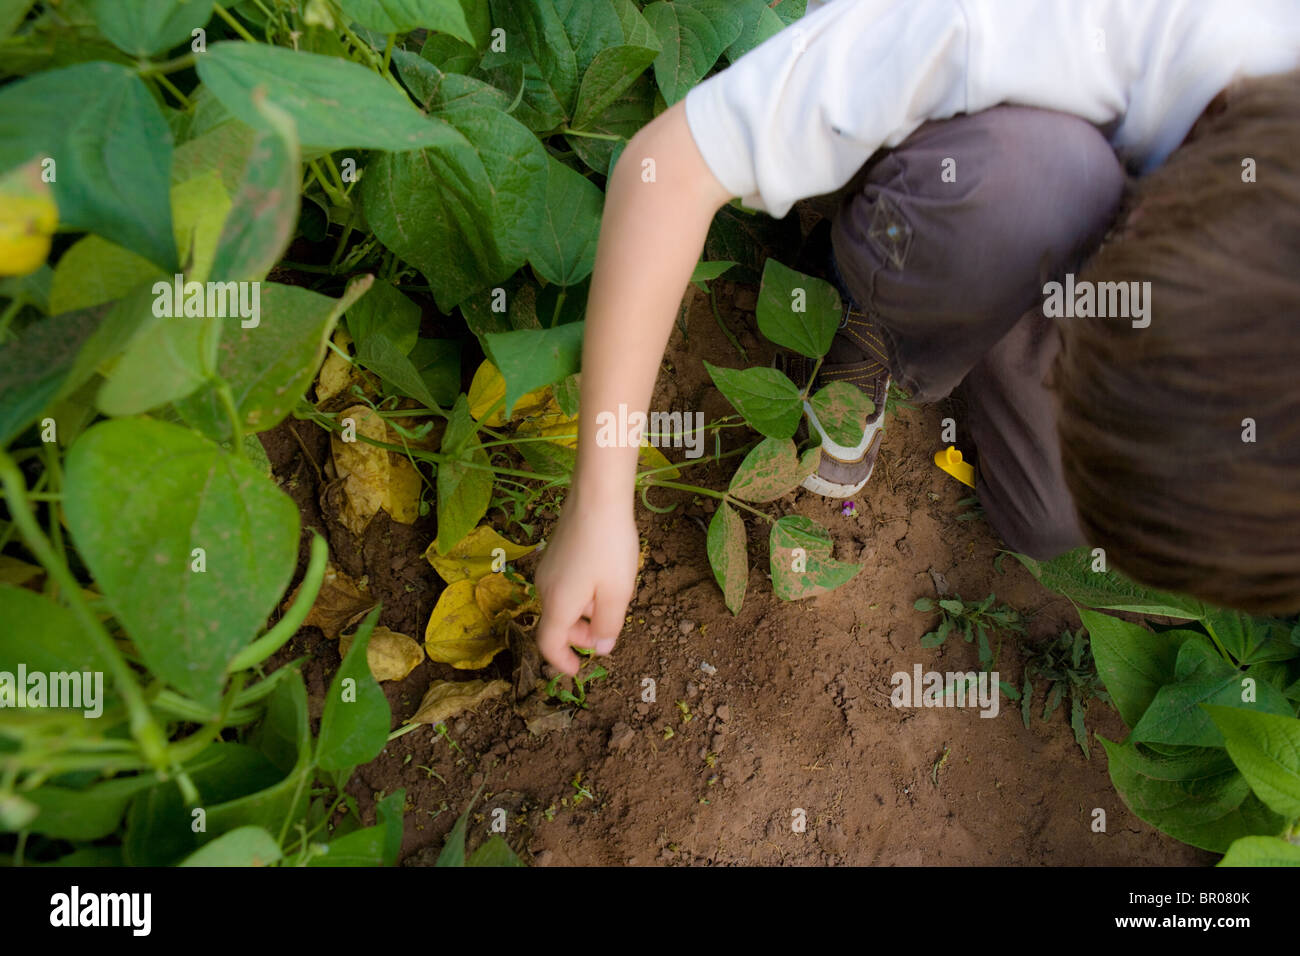 closeup of a child's hand working in a field of green beans, picking beans Stock Photo